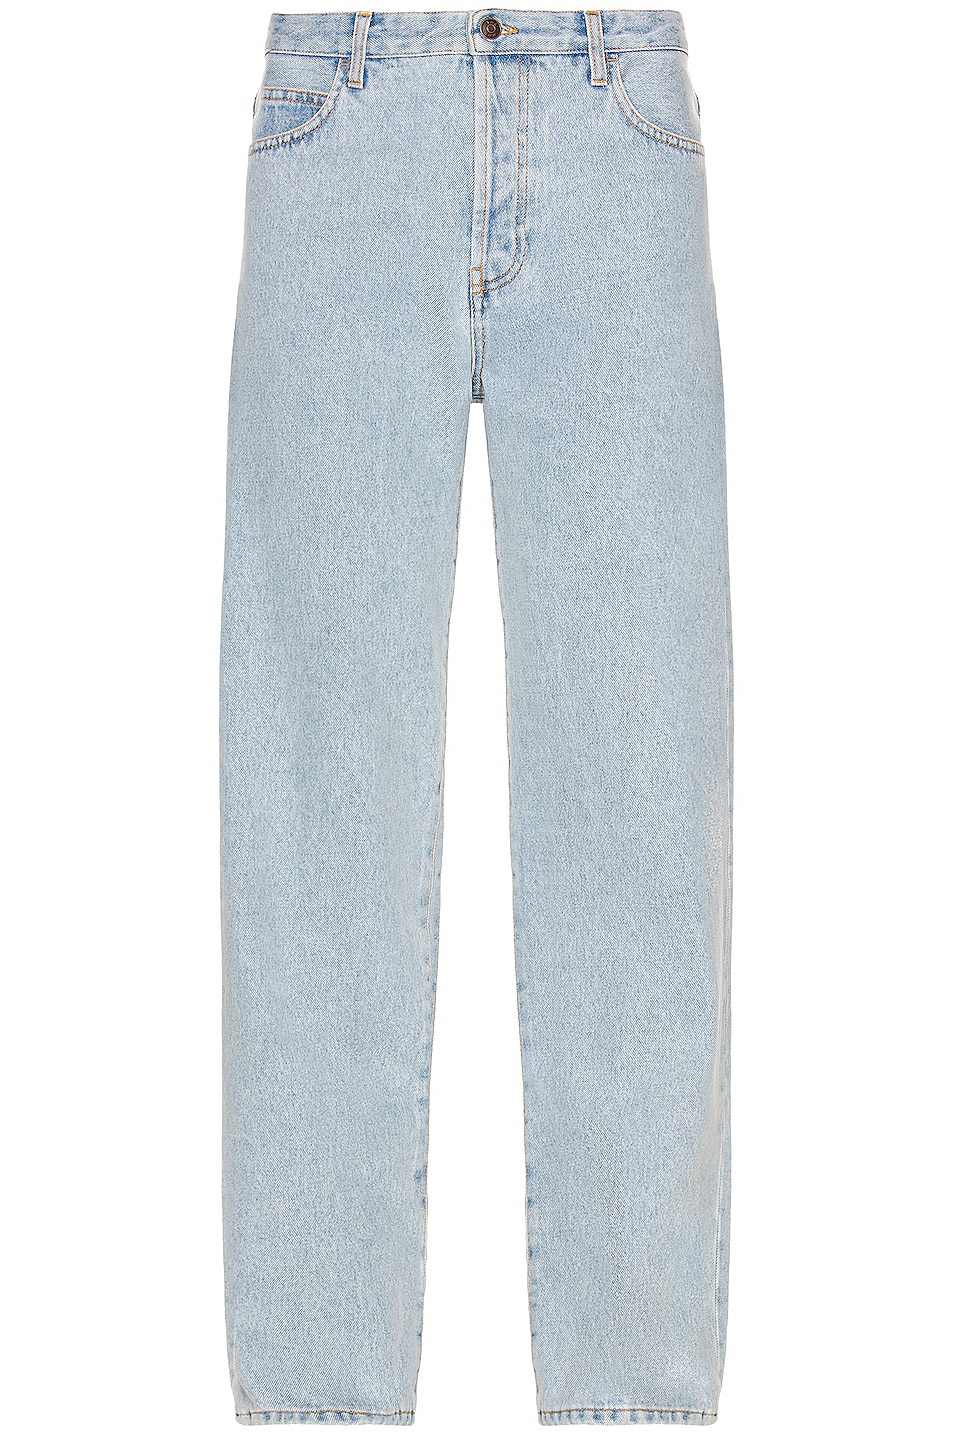 Image 1 of The Row Morton Jeans in Light Blue